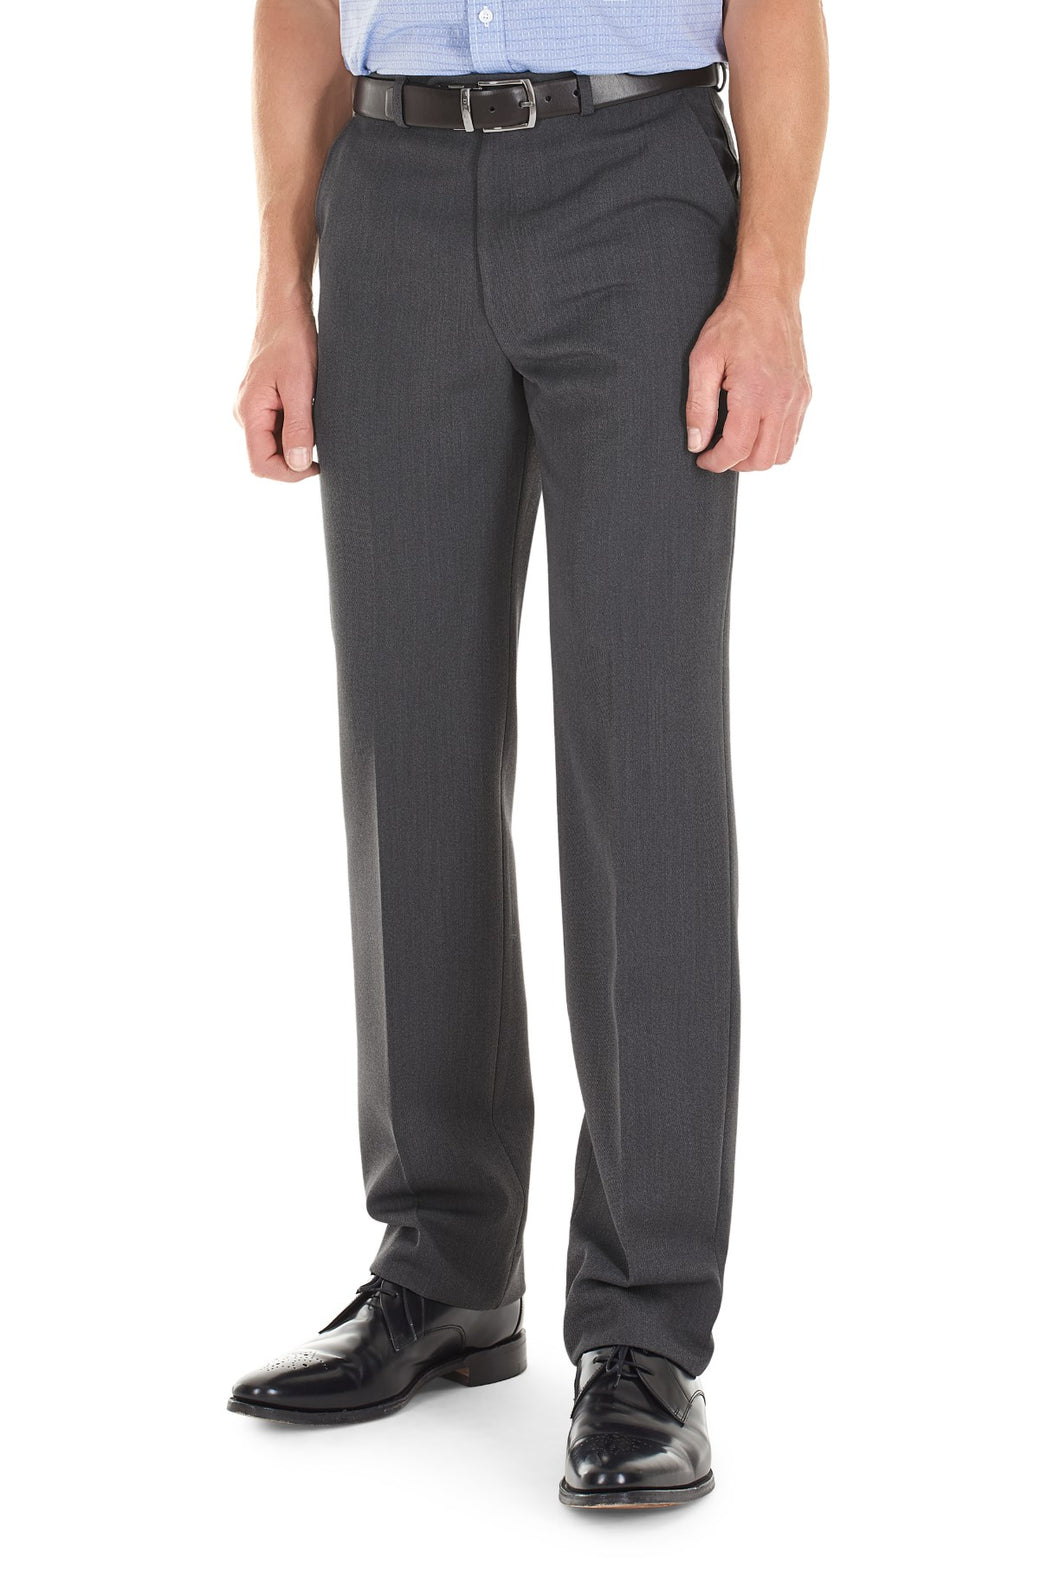 Gurteen Cologne Cavalry Twill Trousers